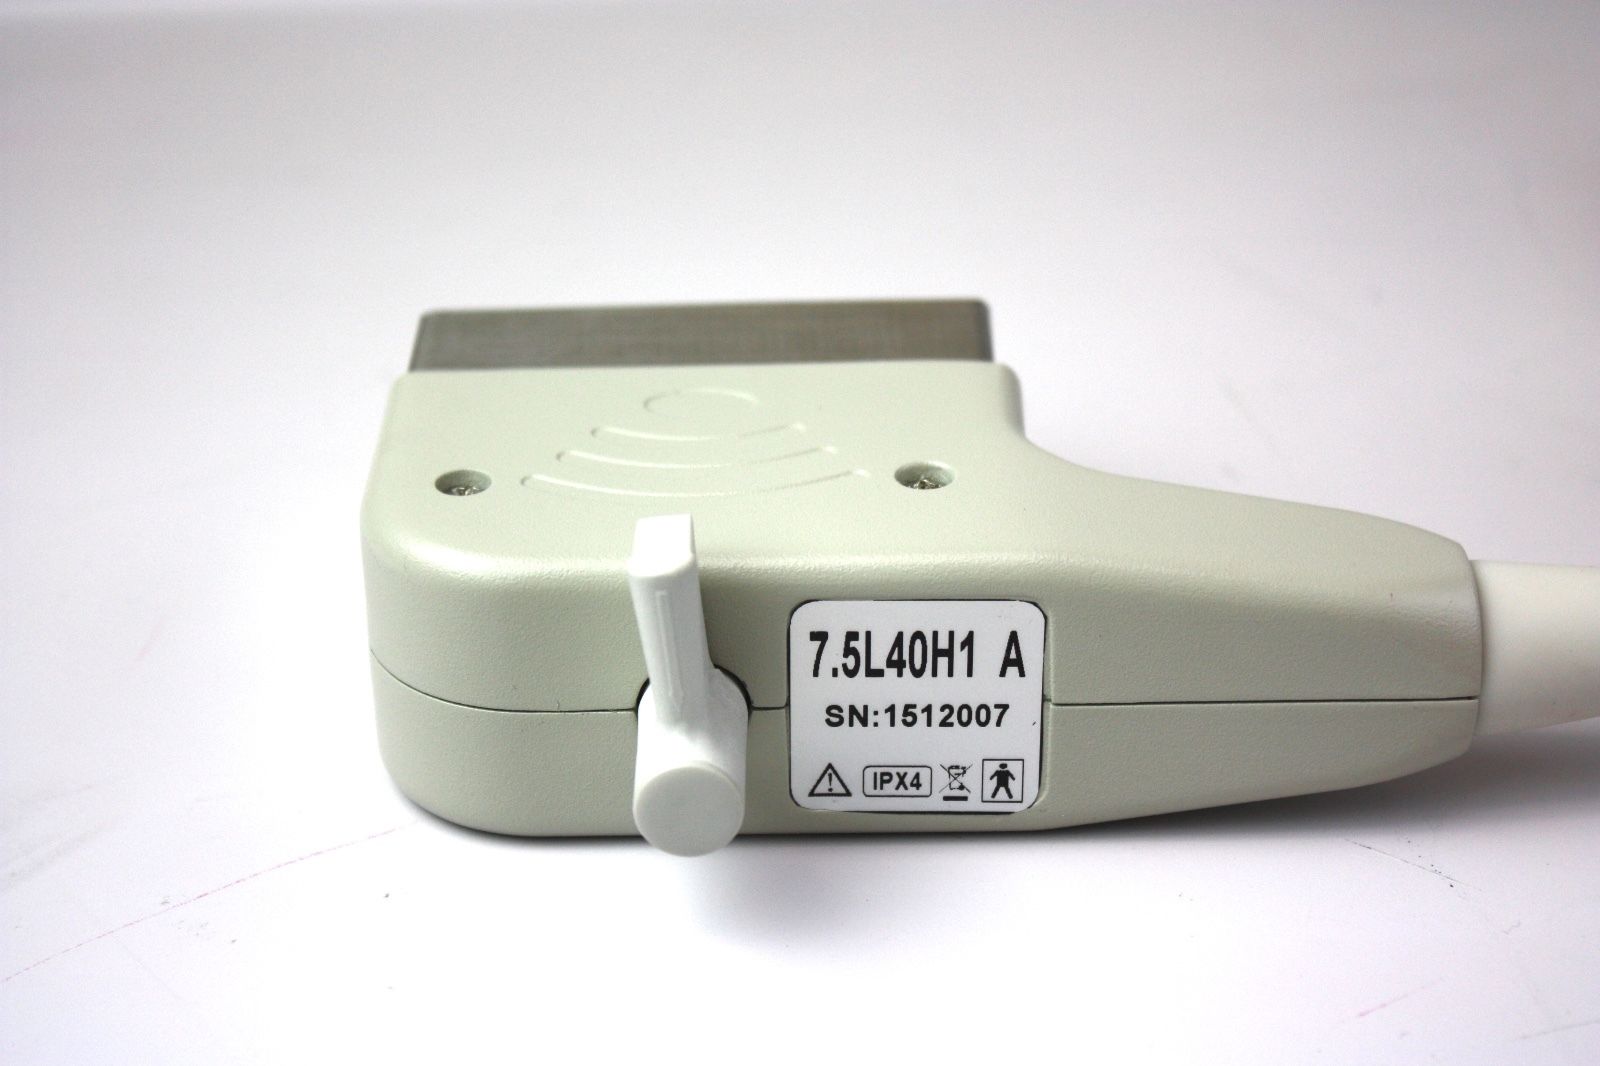 7.5L40H1A Linear Array Probe, 7.5MHz, For Kaixin DCU-12 Ultrasounds DIAGNOSTIC ULTRASOUND MACHINES FOR SALE